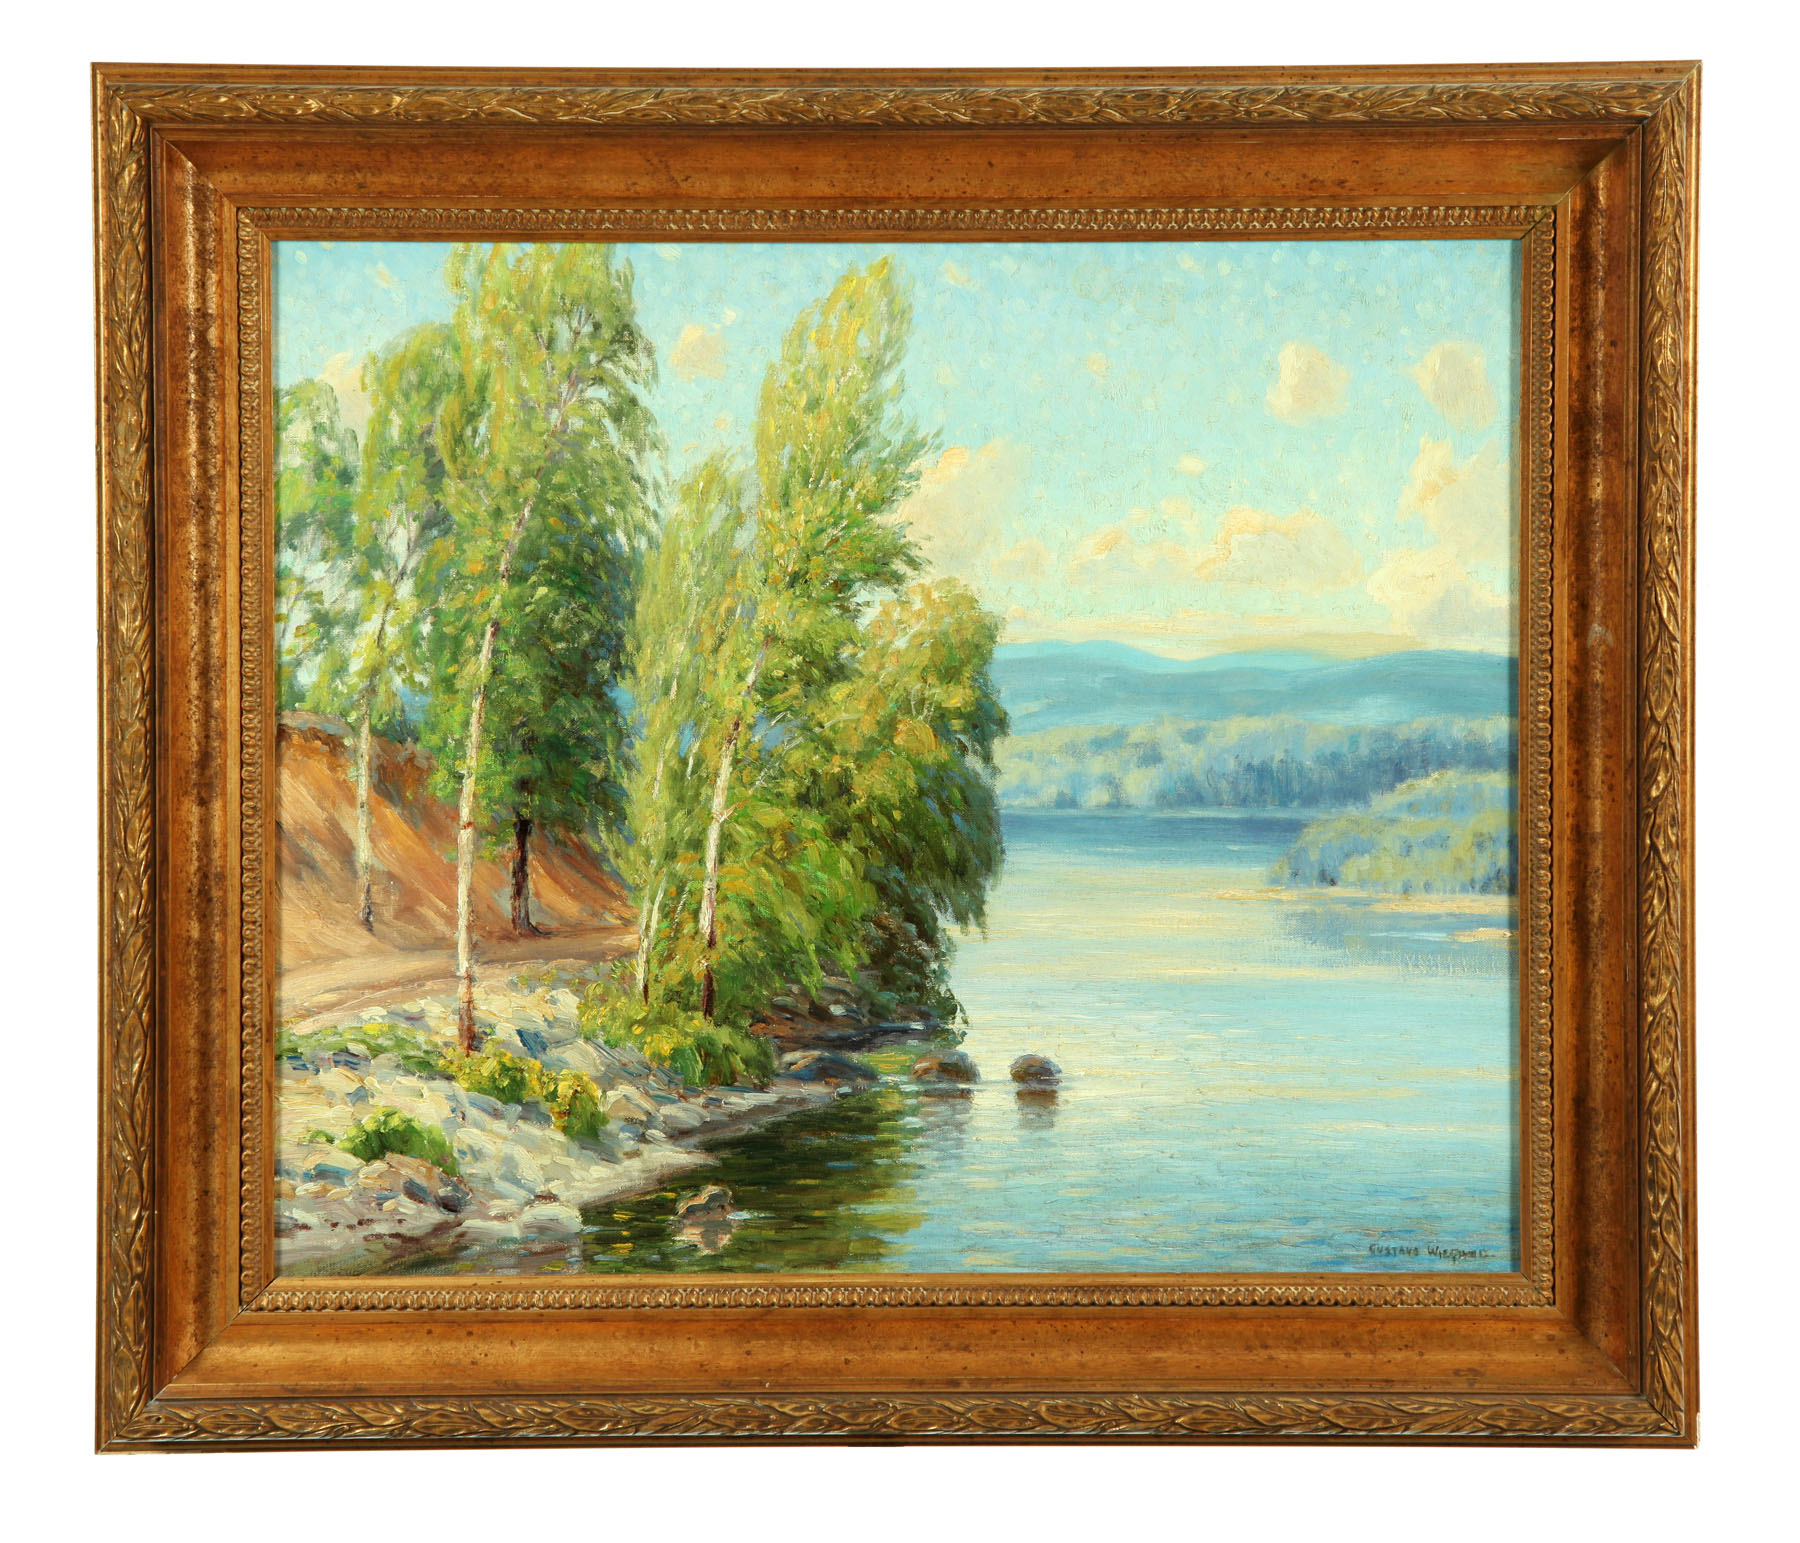 LAKE SUNAPEE N H BY GUSTAVE ADOLPH 123917